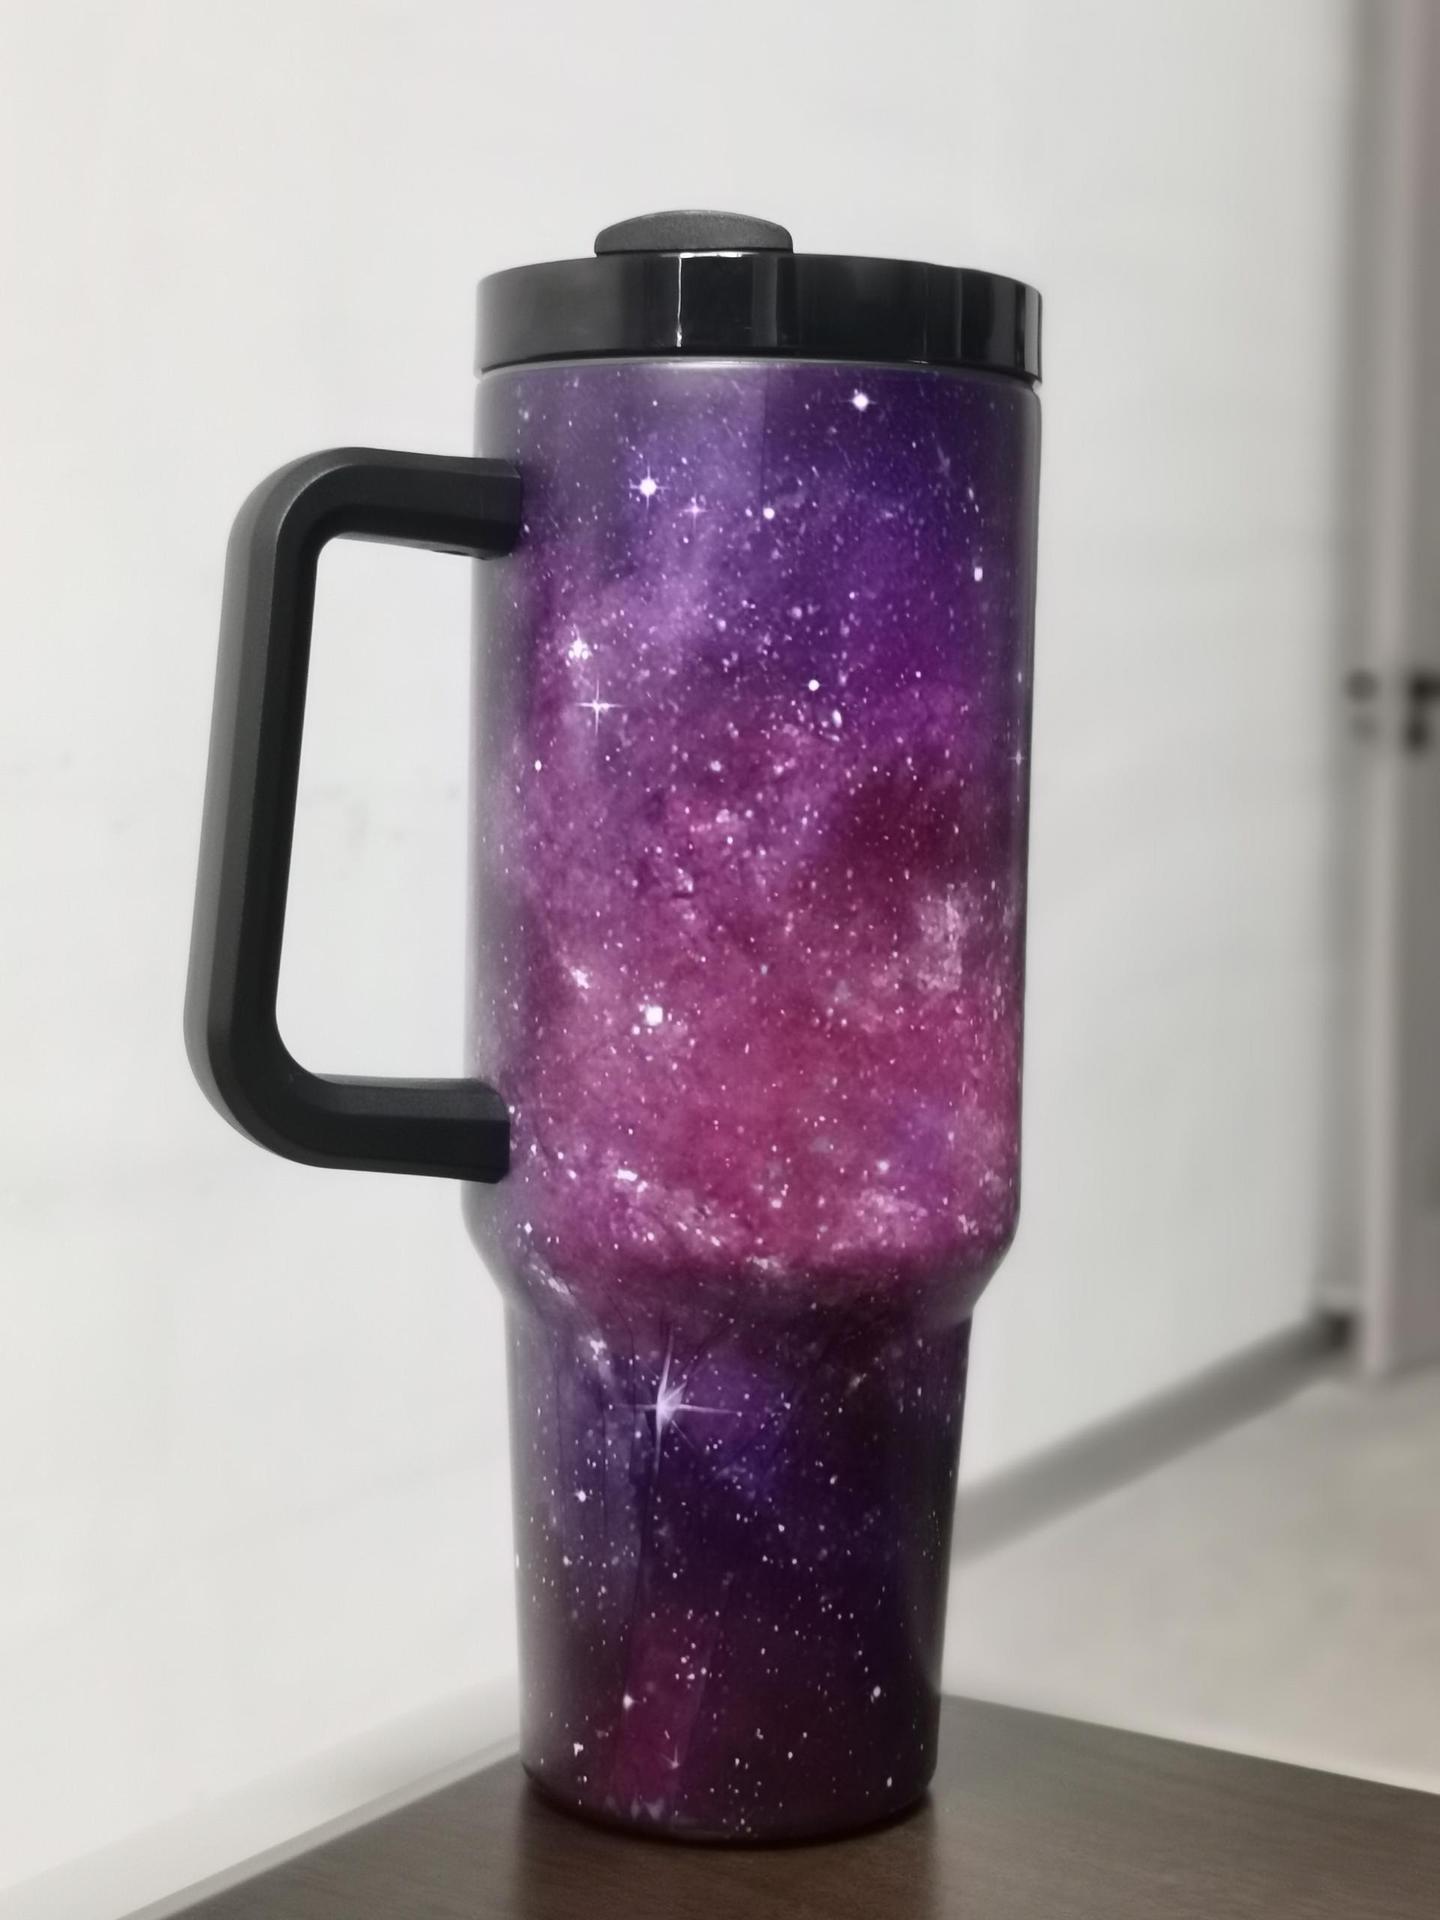 40oz Quencher Tumbler with Straw (Hibiscus Purple)